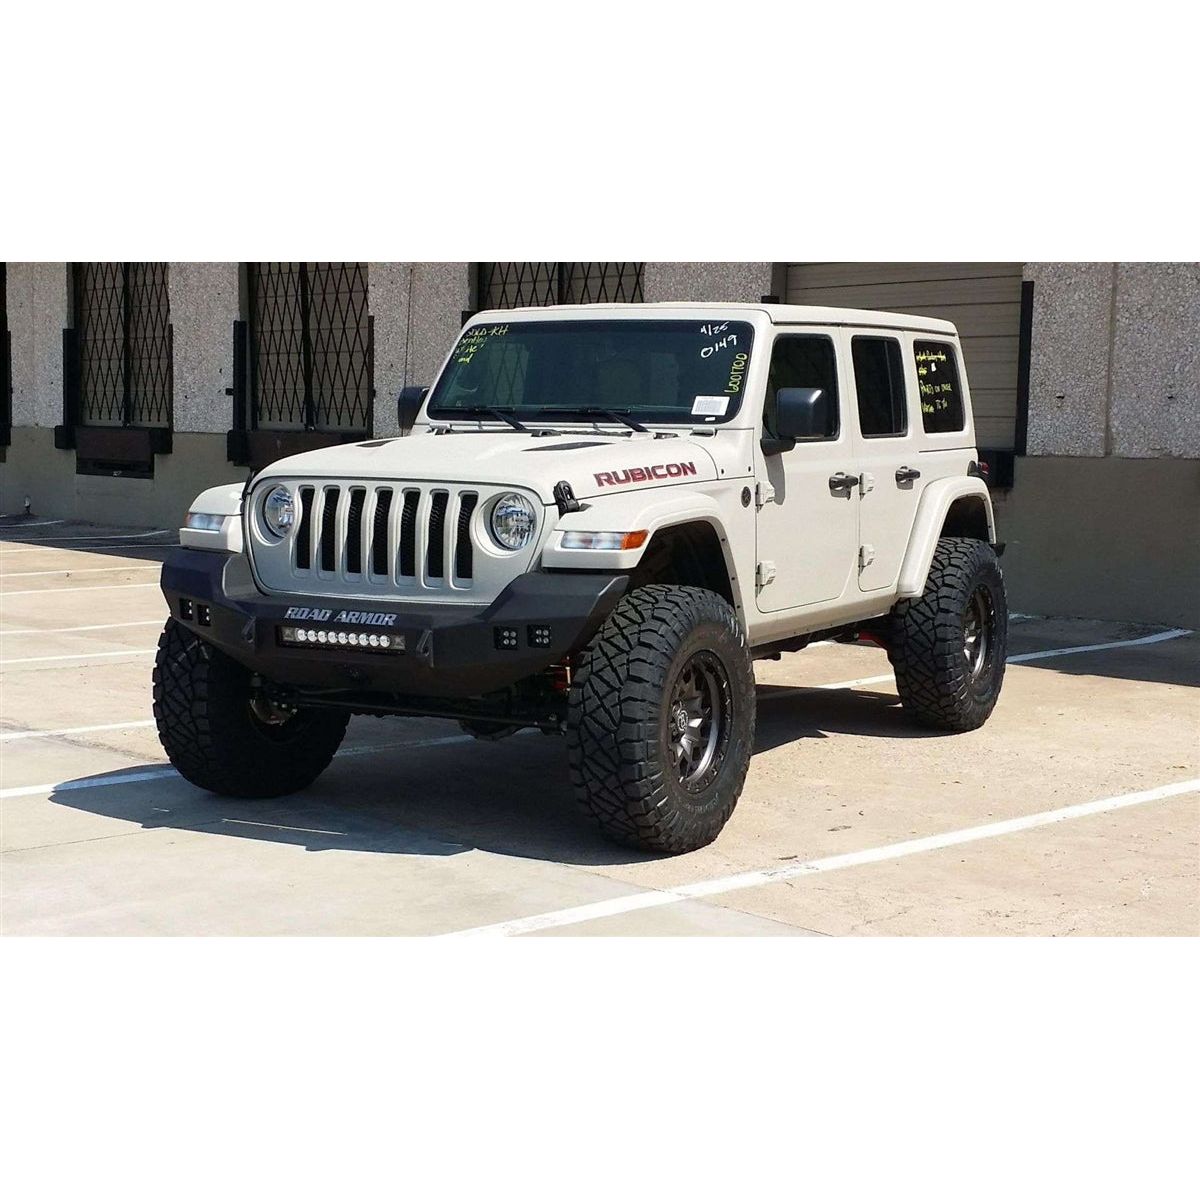 Road Armor Stealth Full Width Front Winch Bumper with Pre-Runner Guard for 2018-C JL - Gladiator JT Rubicon